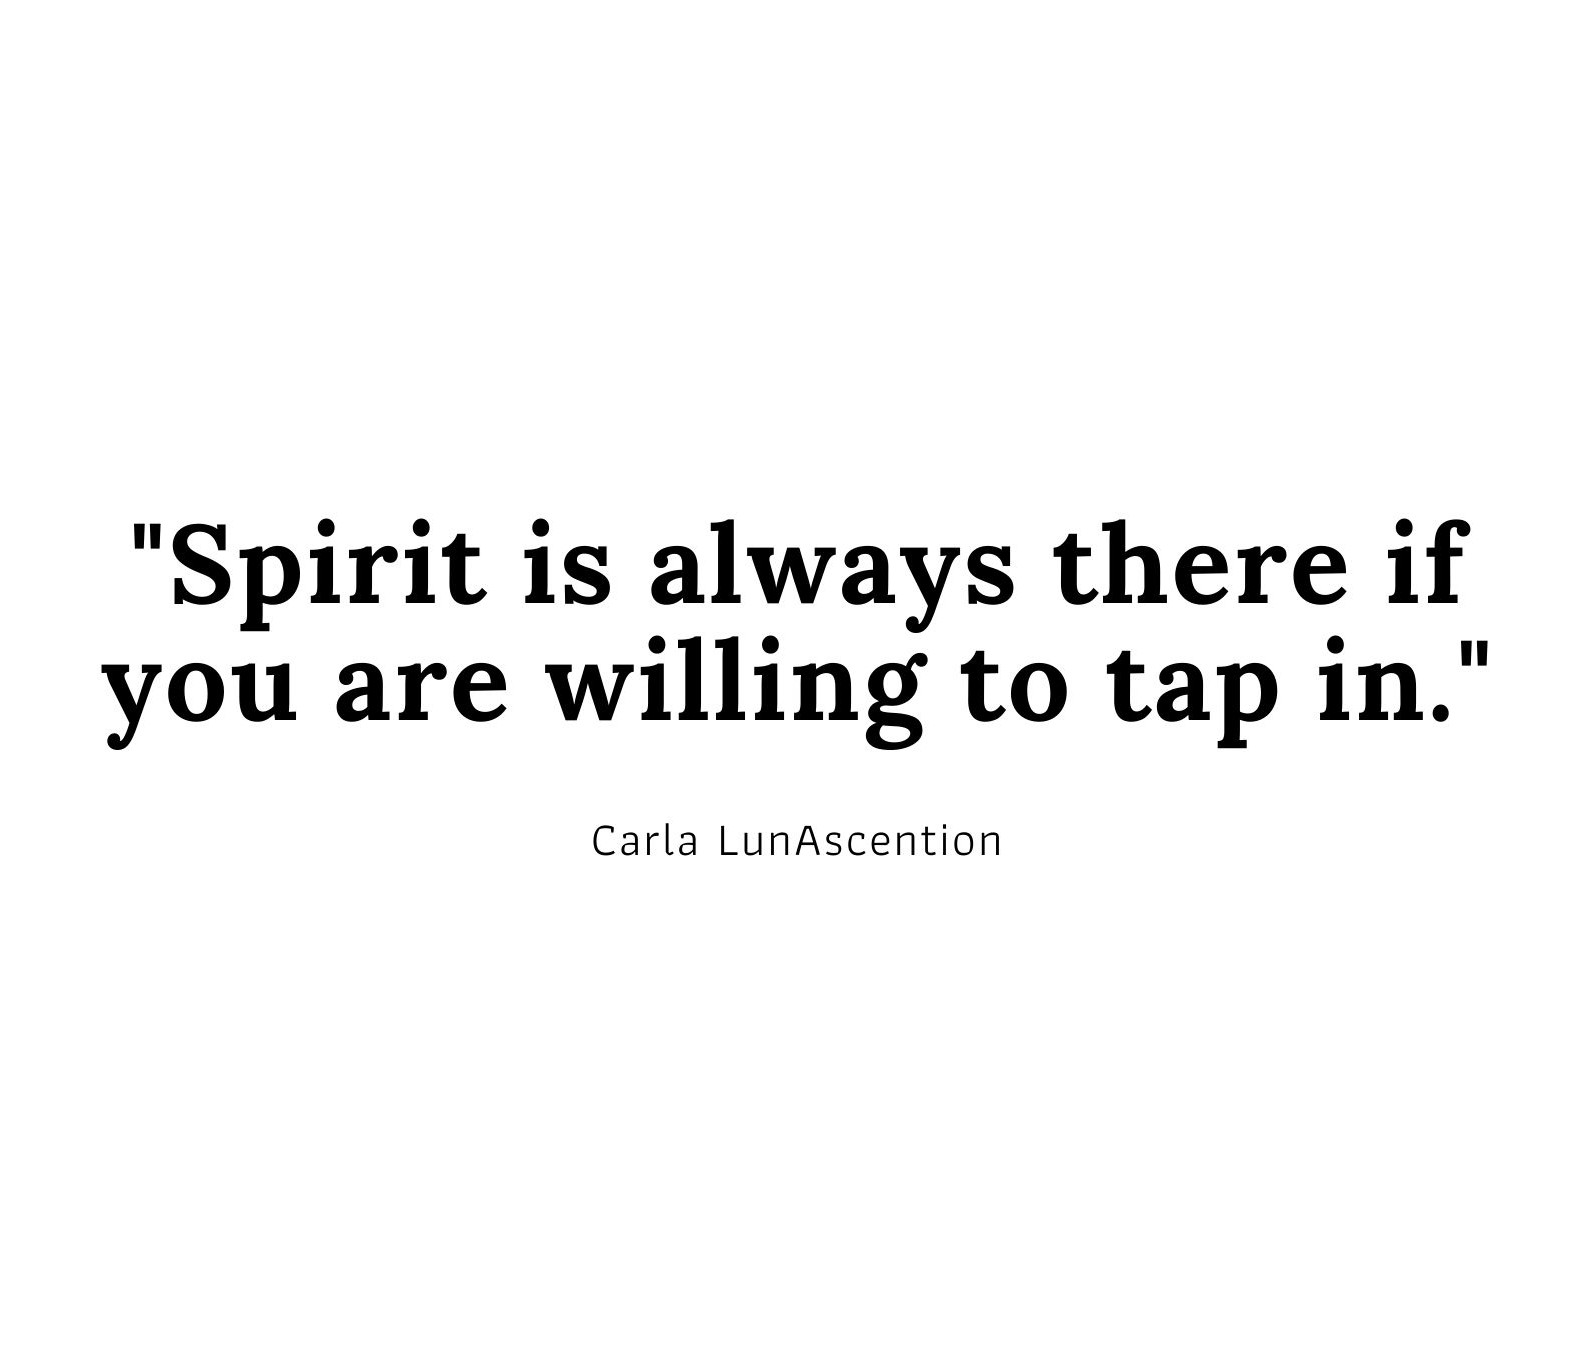 "Spirit is always there if you are willing to tap in."Carla Lunascention